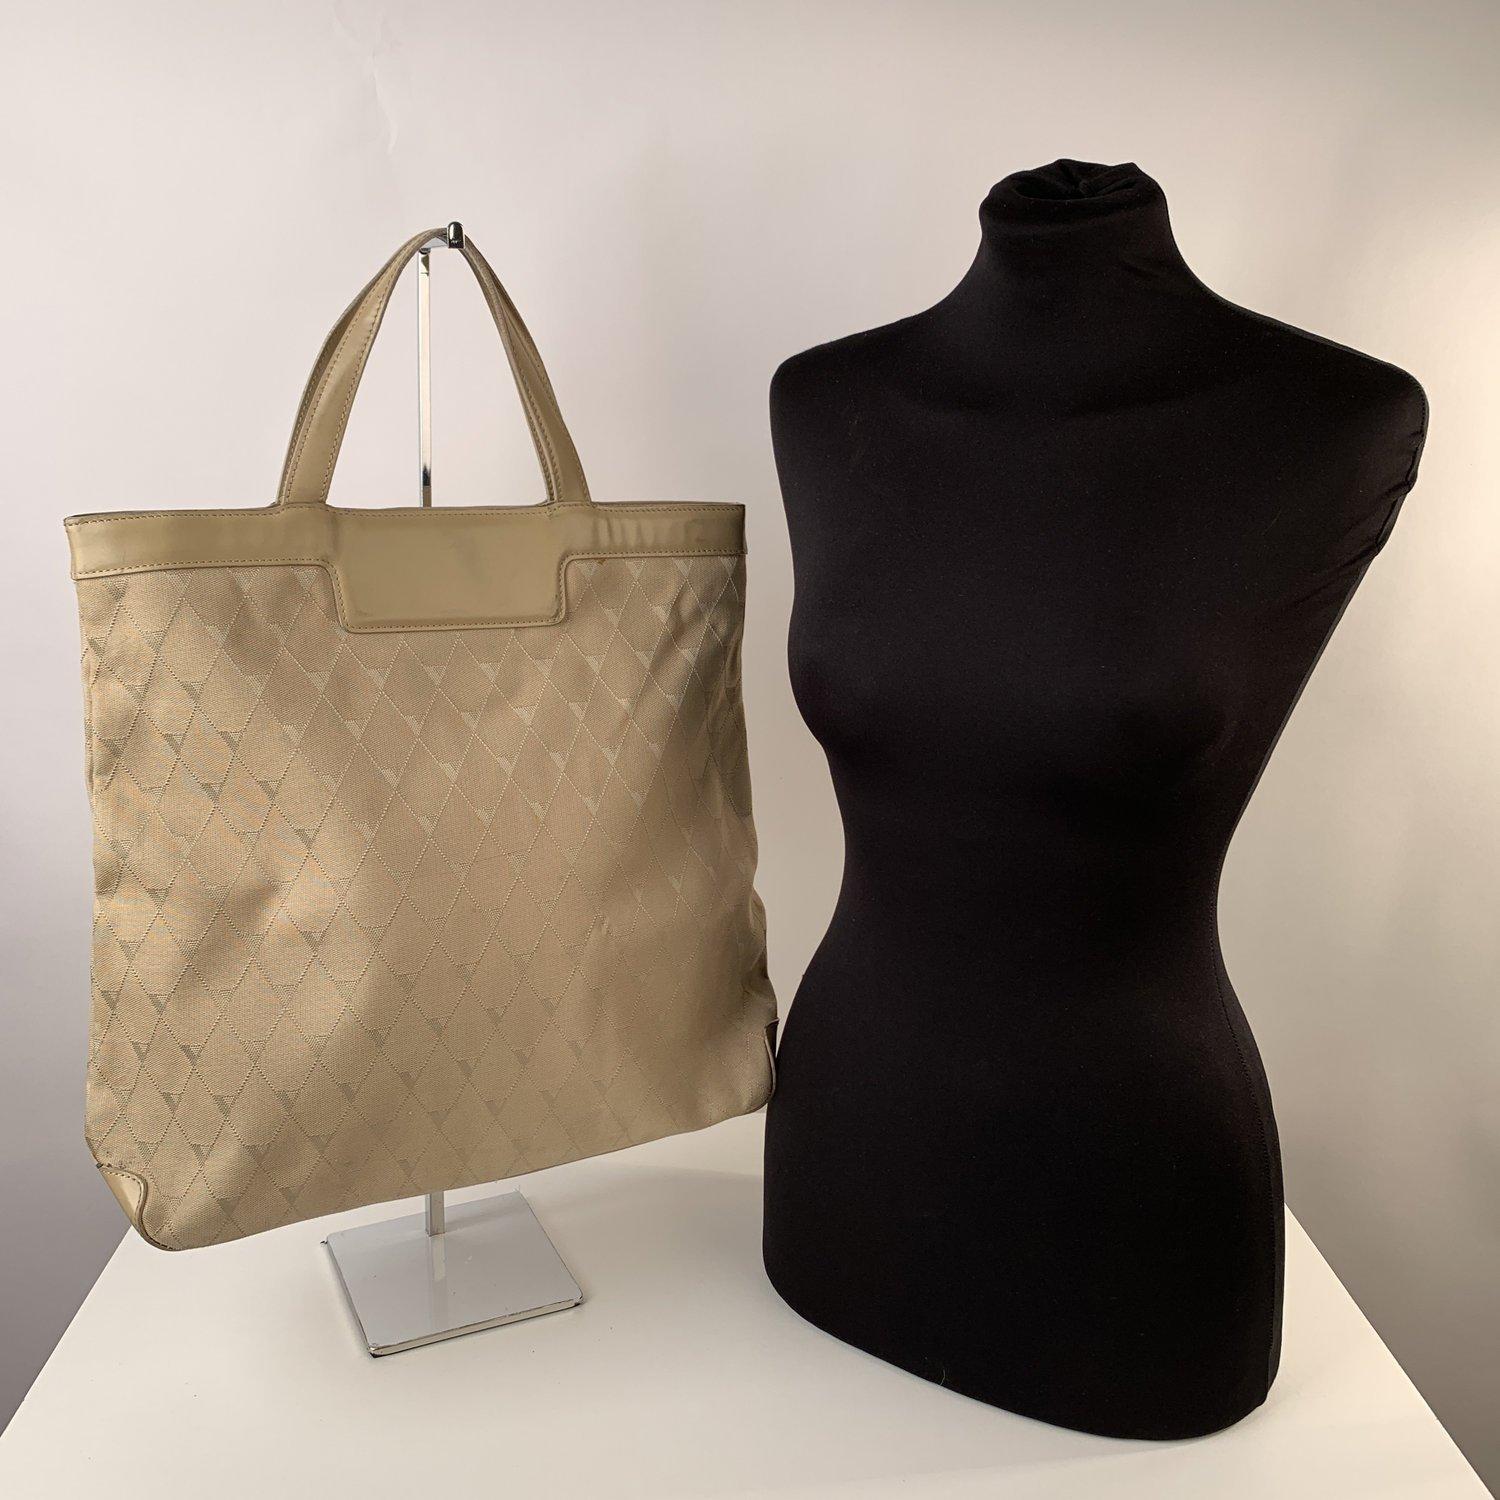 MATERIAL: Canvas COLOR: Beige MODEL: Tote GENDER: Women SIZE: Large Condition B :GOOD CONDITION - Some light wear of use - Some darkness and scratches on leather trim (especially on the bottom). A brown stain on canvas on the back Measurements BAG